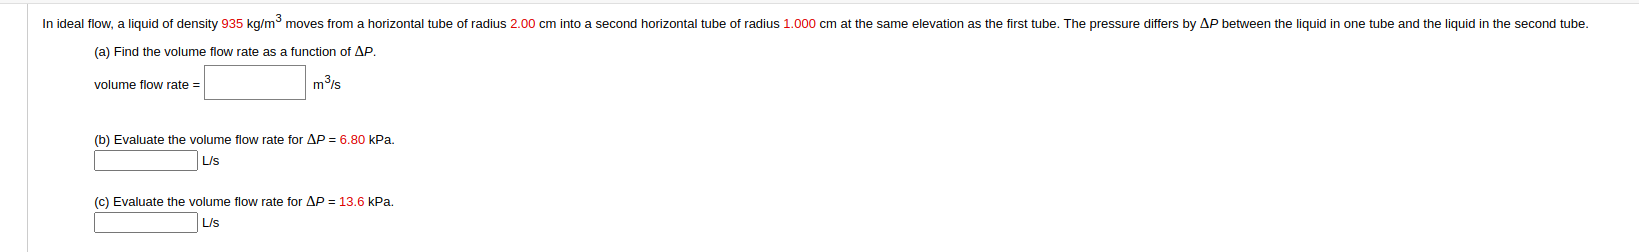 In ideal flow, a liquid of density 935 kg/m moves from a horizontal tube of radius 2.00 cm into a second horizontal tube of radius 1.000 cm at the same elevation as the first tube. The pressure differs by AP between the liquid in one tube and the liquid in the second tube.
(a) Find the volume flow rate as a function of AP.
volume flow rate =
mis
(b) Evaluate the volume flow rate for AP = 6.80 kPa.
L/s
(c) Evaluate the volume flow rate for AP = 13.6 kPa.
L/s
